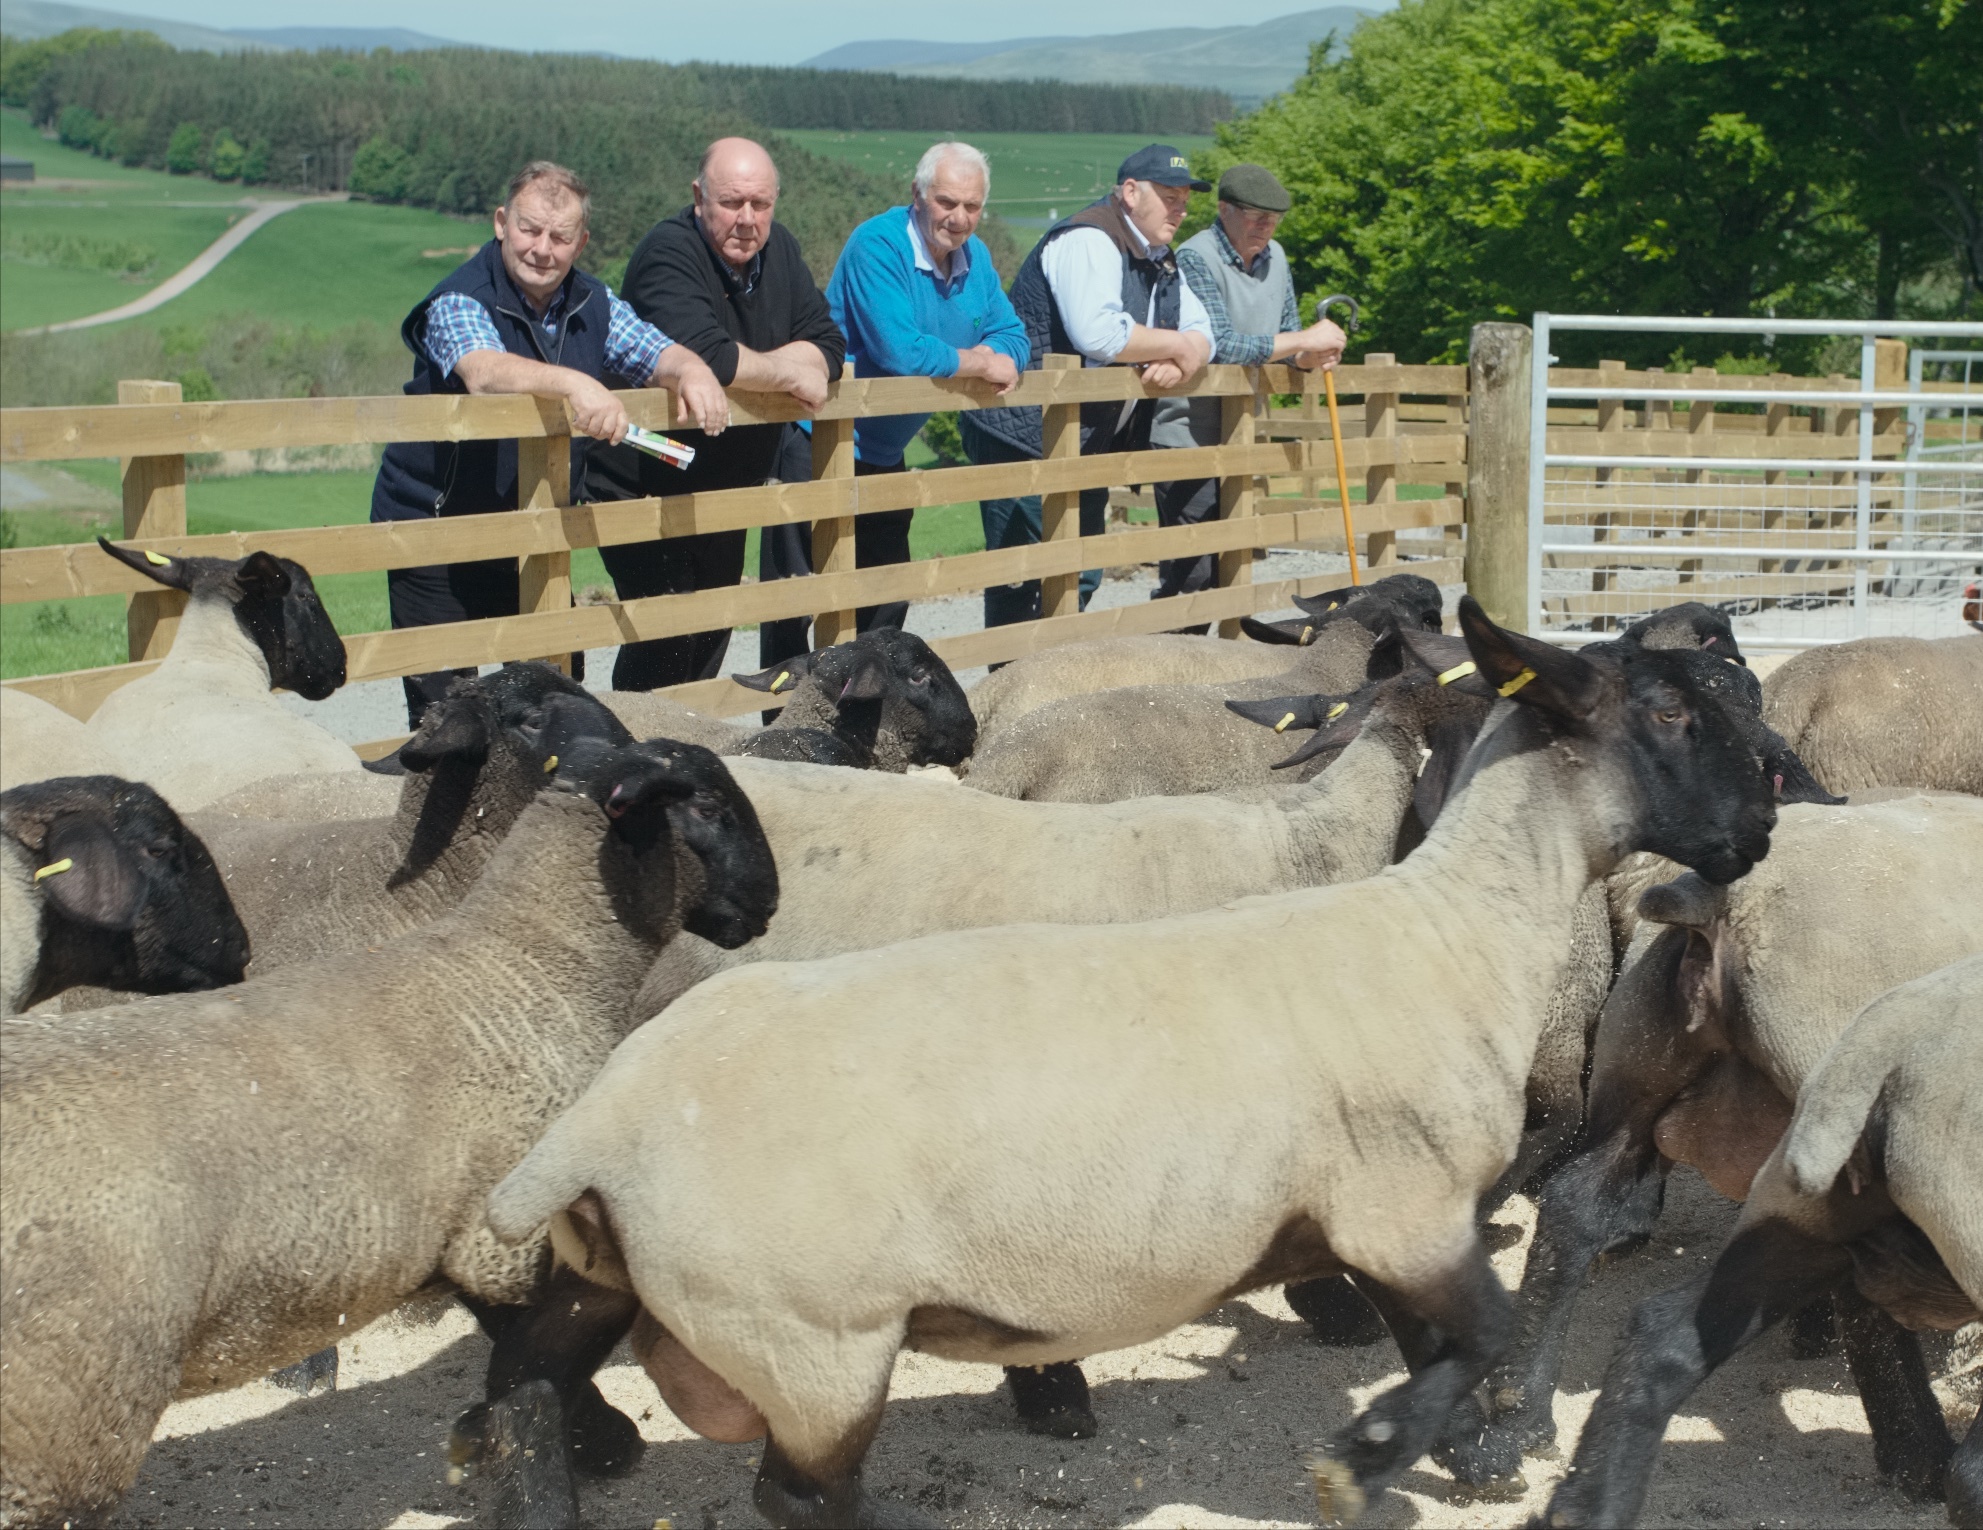 More than 40 breeds were on show at Scotsheep